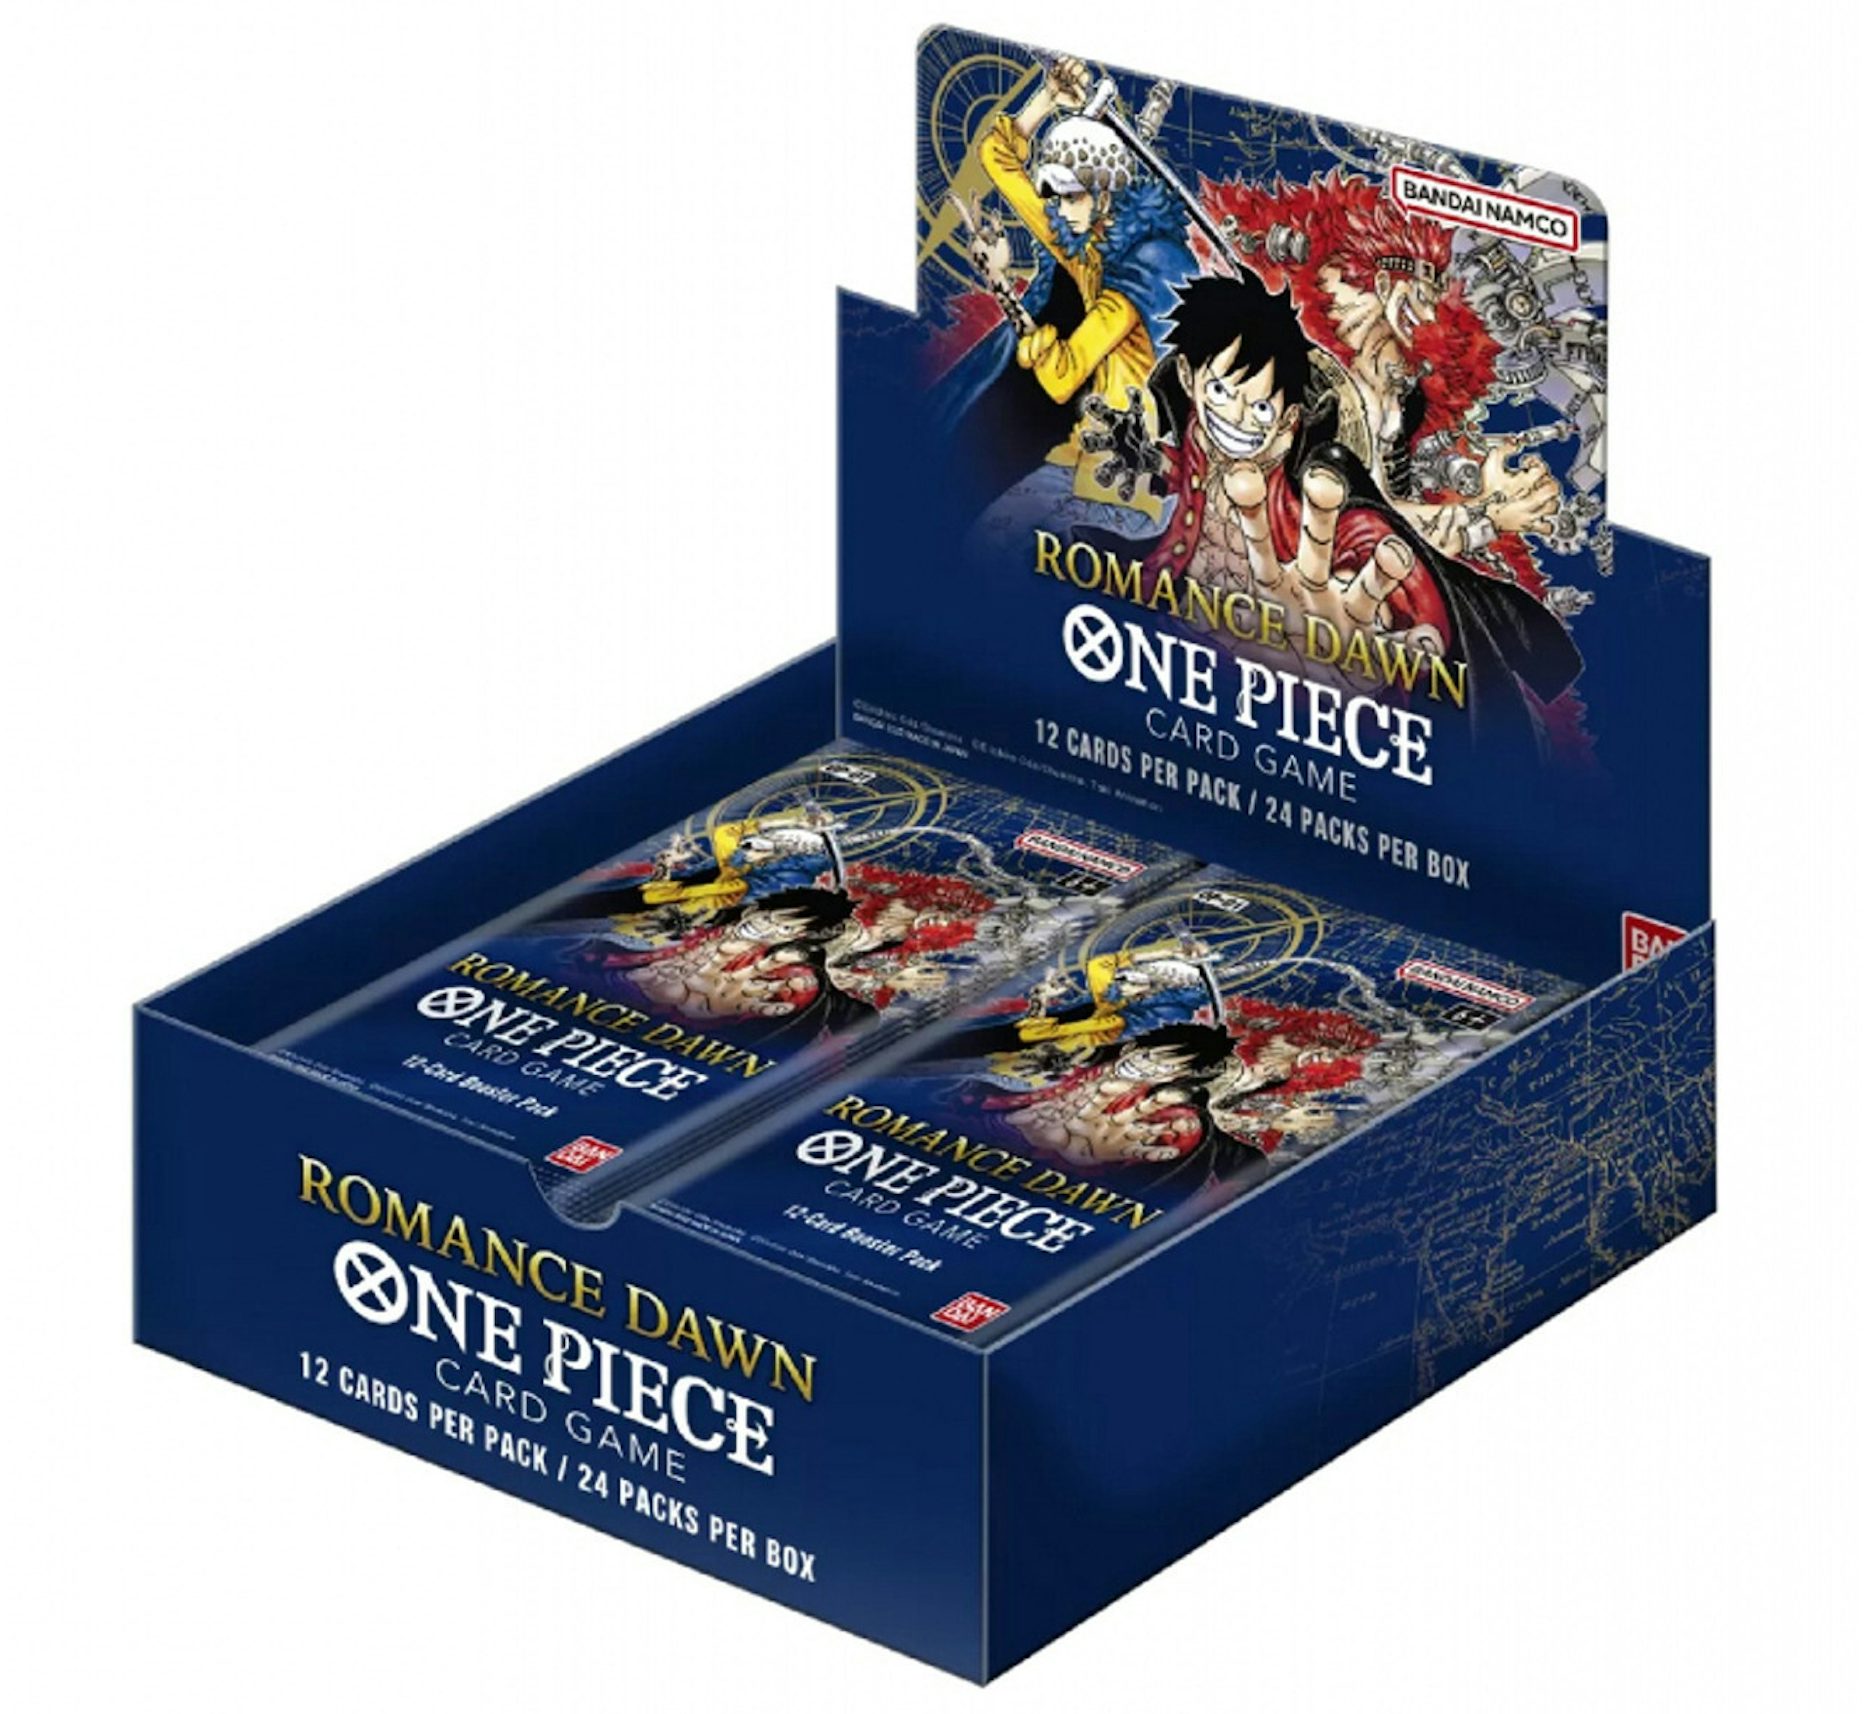 One Piece Card Game Booster Pack OP-06 (Set of 24 Packs) (Re-run)